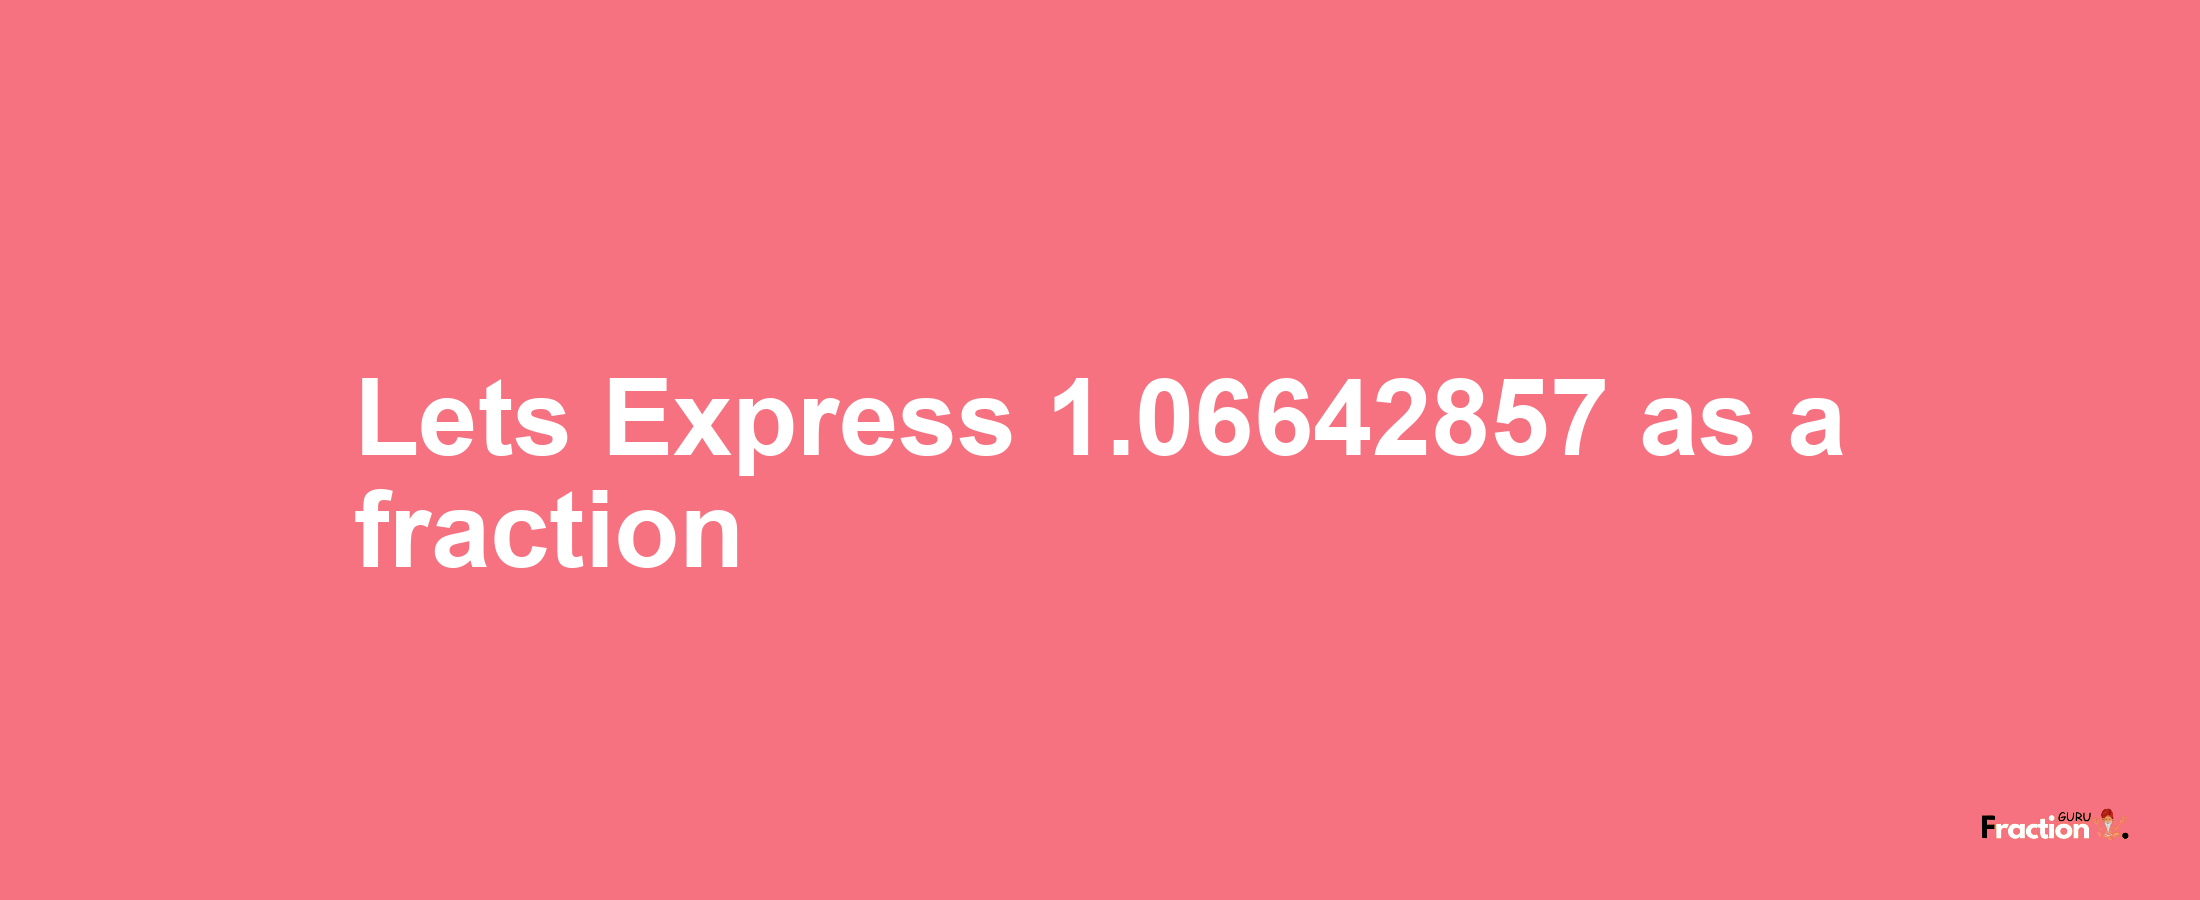 Lets Express 1.06642857 as afraction